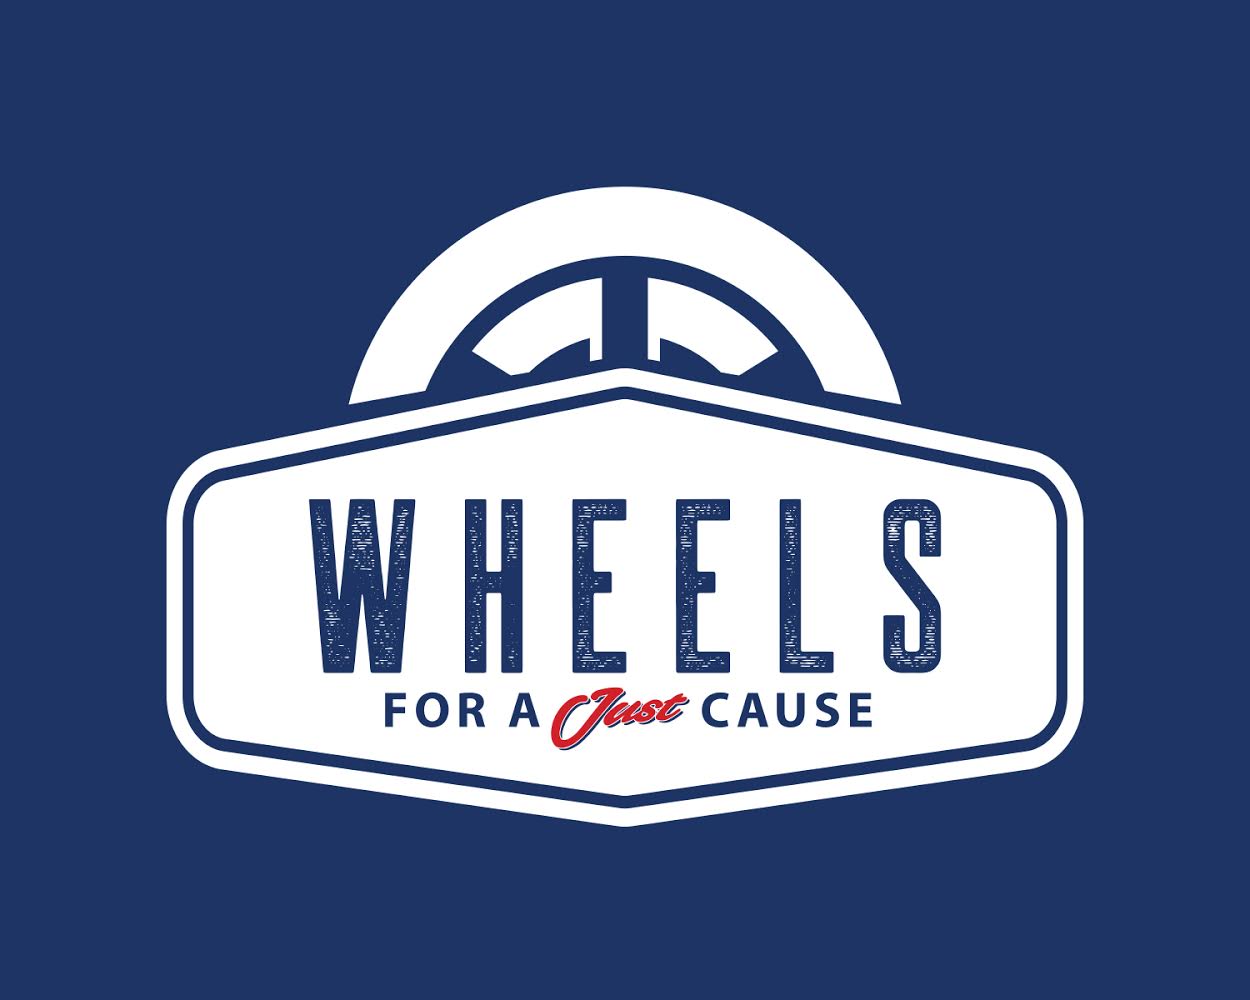 Wheels for a Just cause | Just Automotive